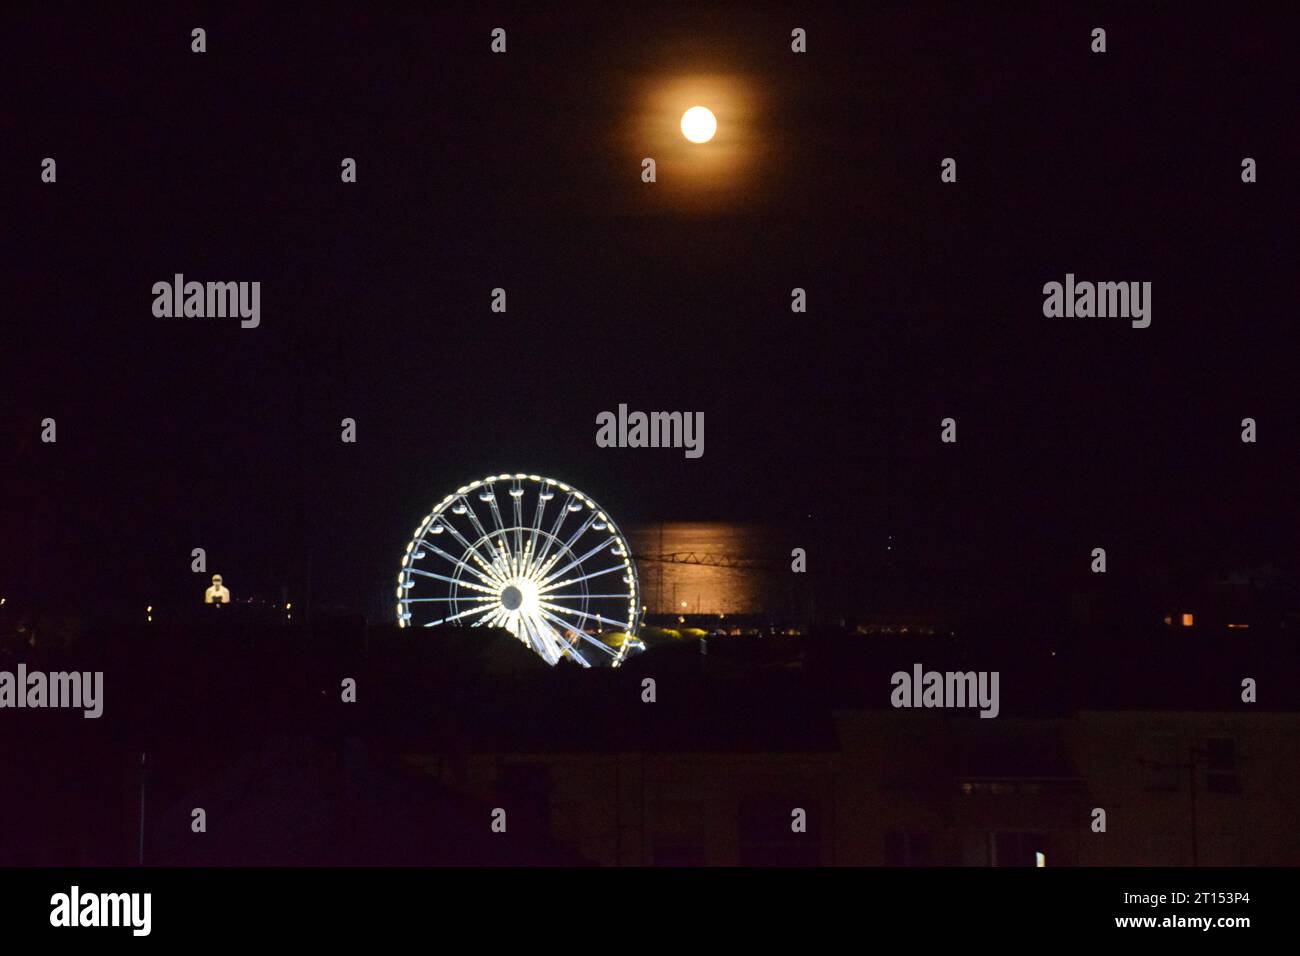 Carousel lit up at night & full moon, Antibes, Cote d'Azur, France Sep 2023 Stock Photo